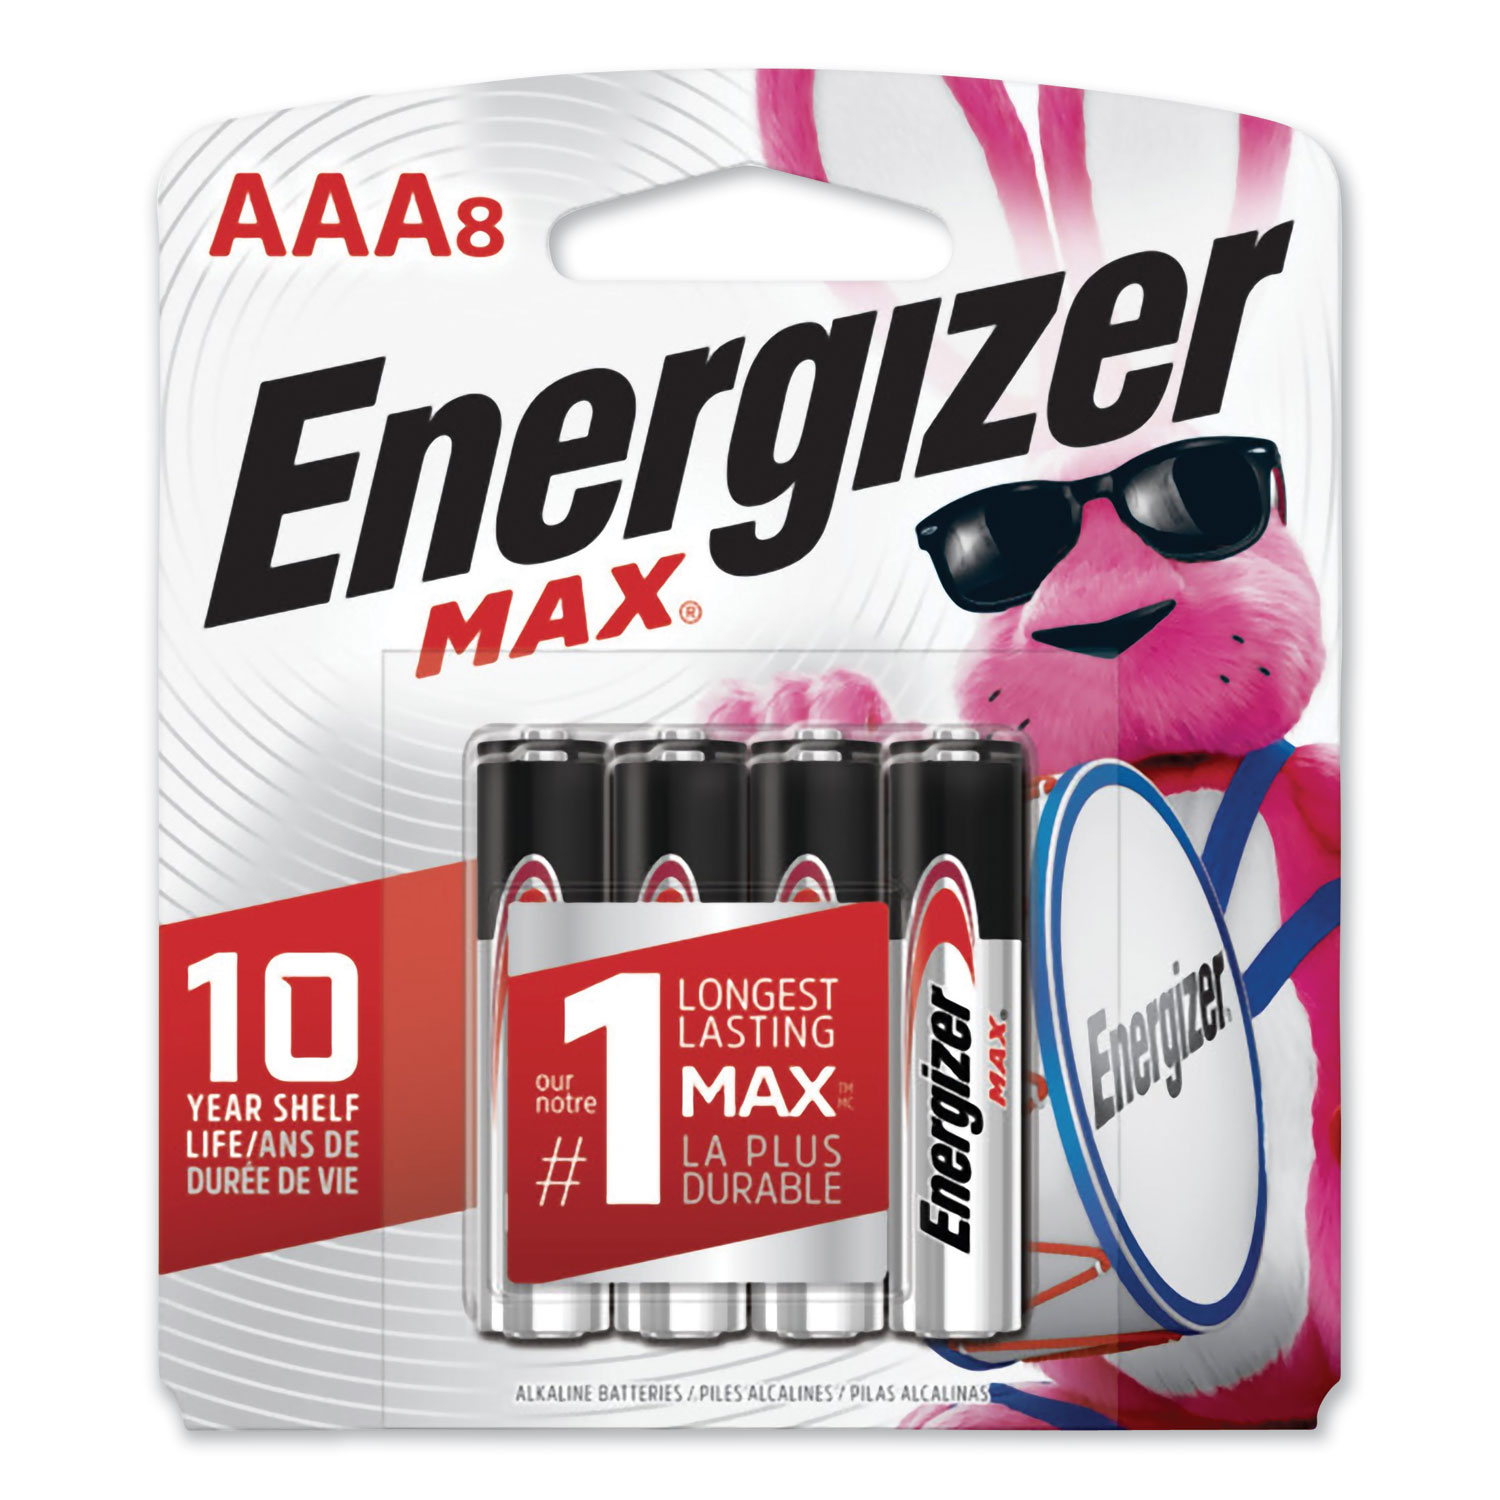  Energizer E92MP-8 MAX Alkaline AAA Batteries, 1.5V, 8/Pack (EVEE92MP8) 